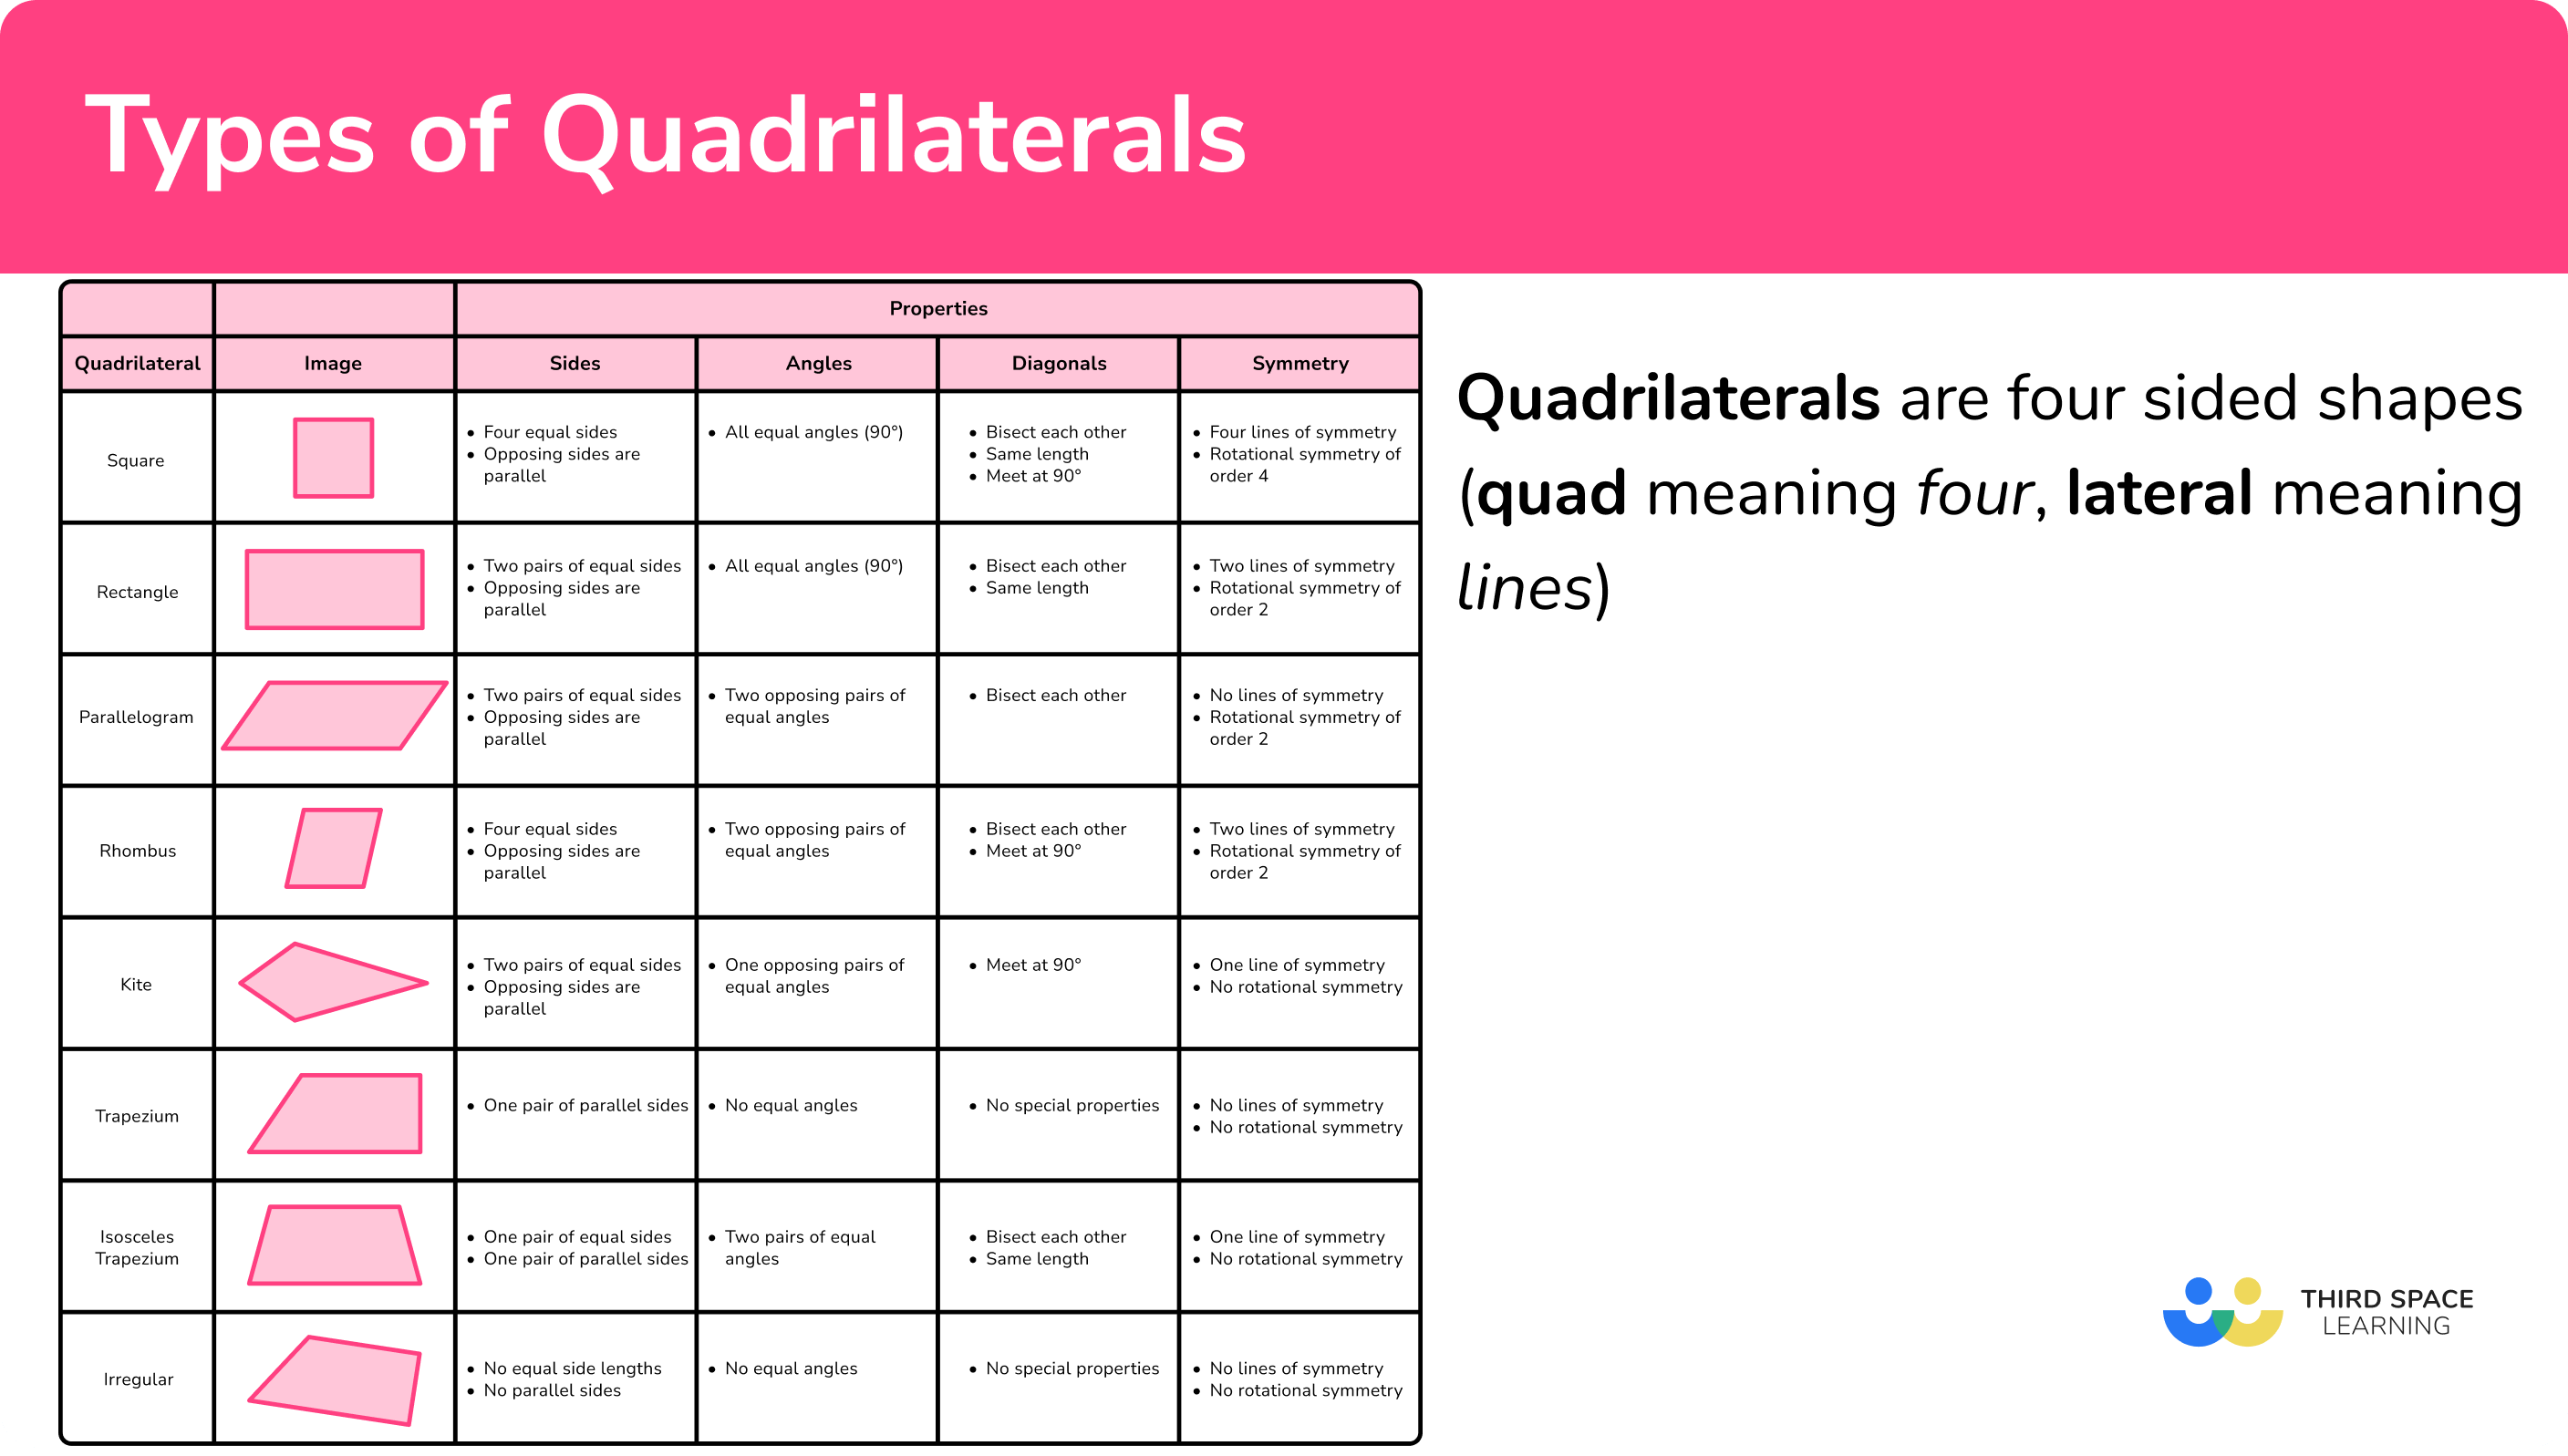 What are types of quadrilaterals?